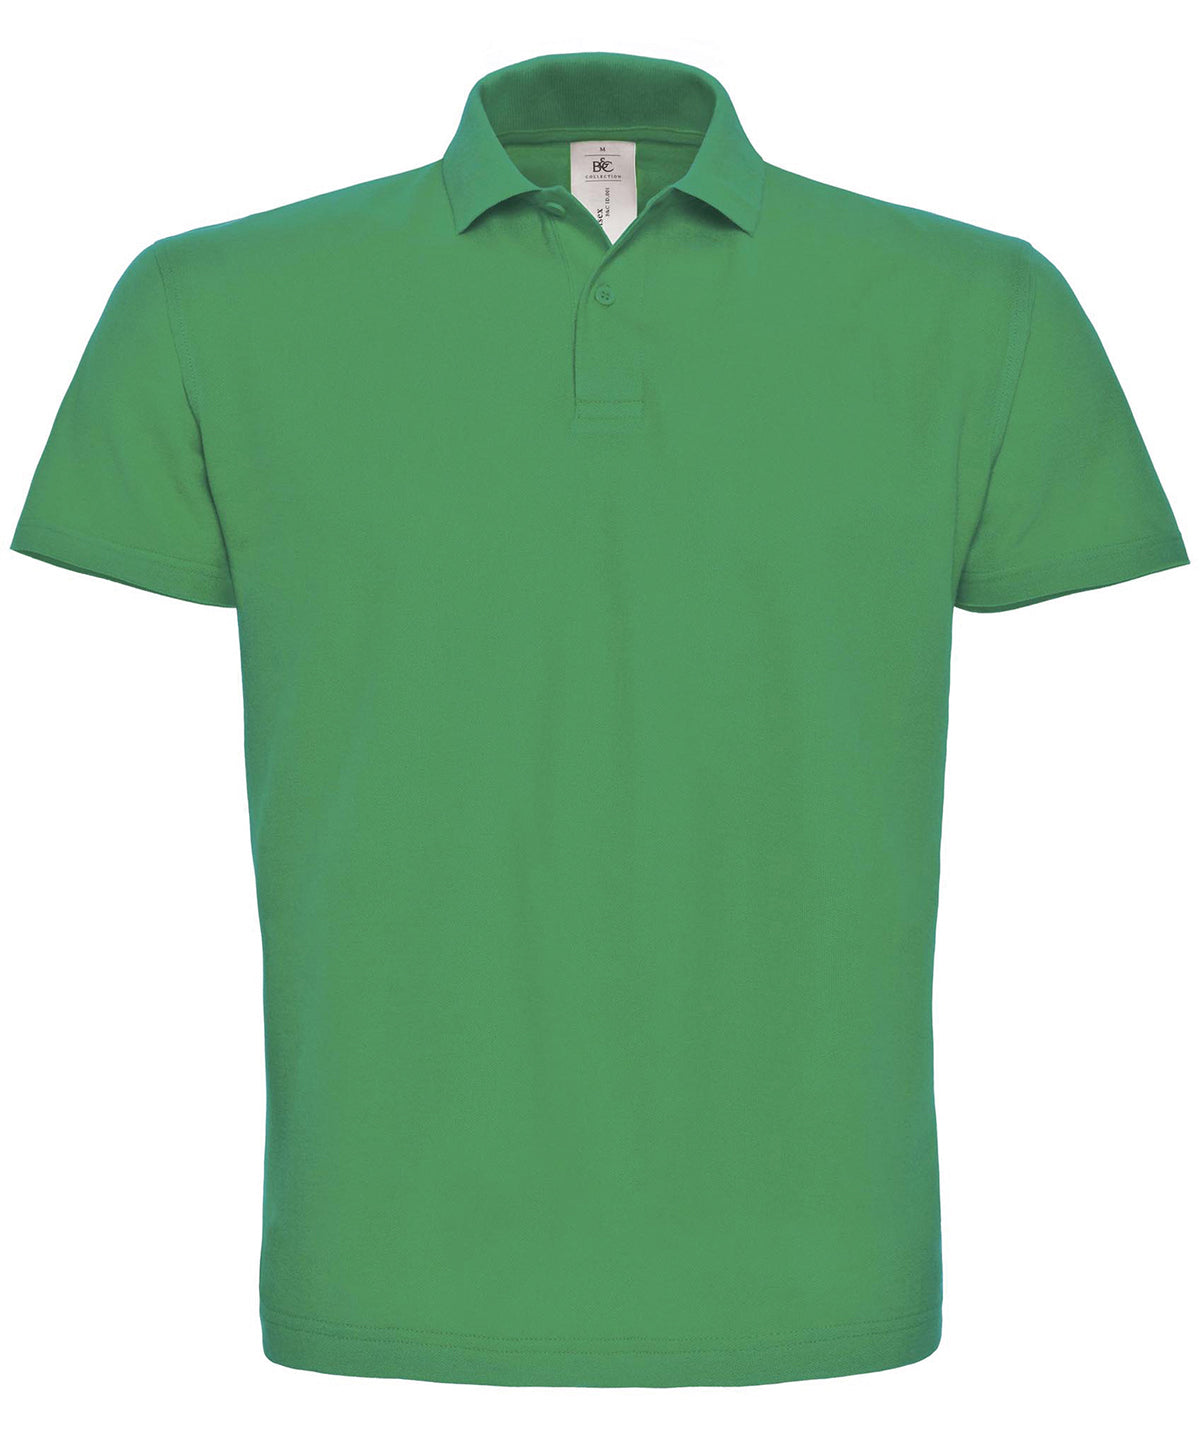 Personalised Polo Shirts - Mid Green B&C Collection B&C ID.001 polo